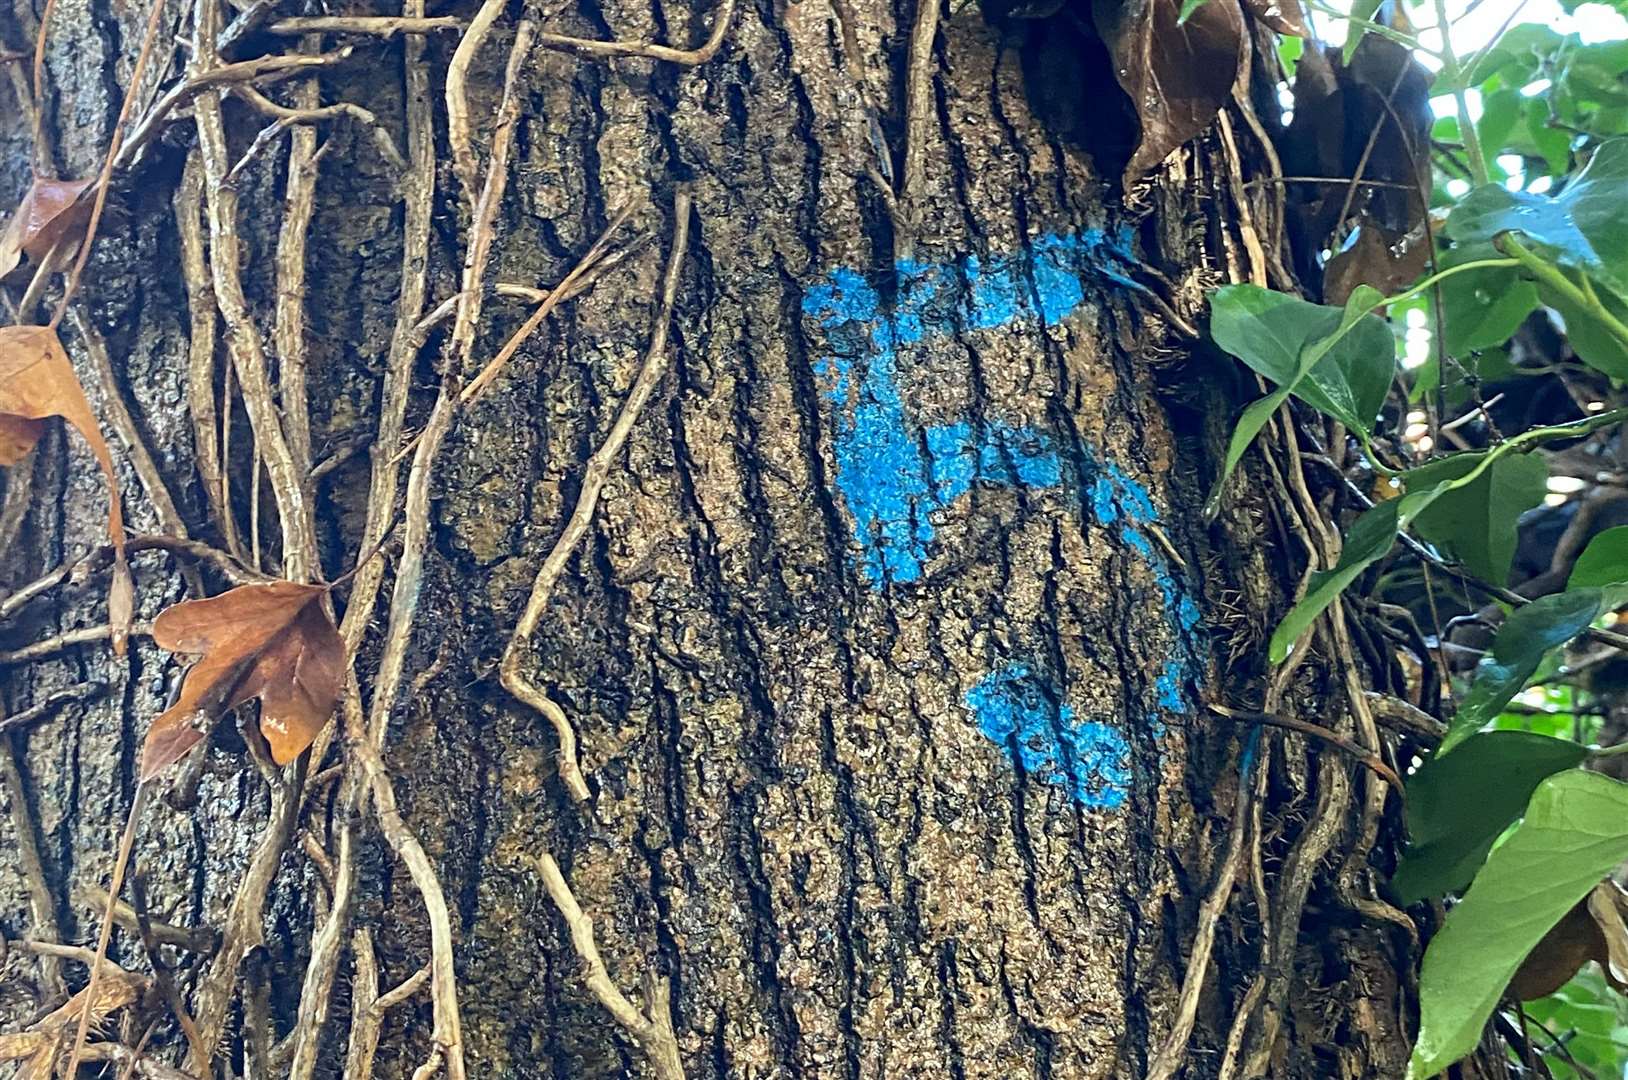 Some tree trunks have been marked in blue with numbers